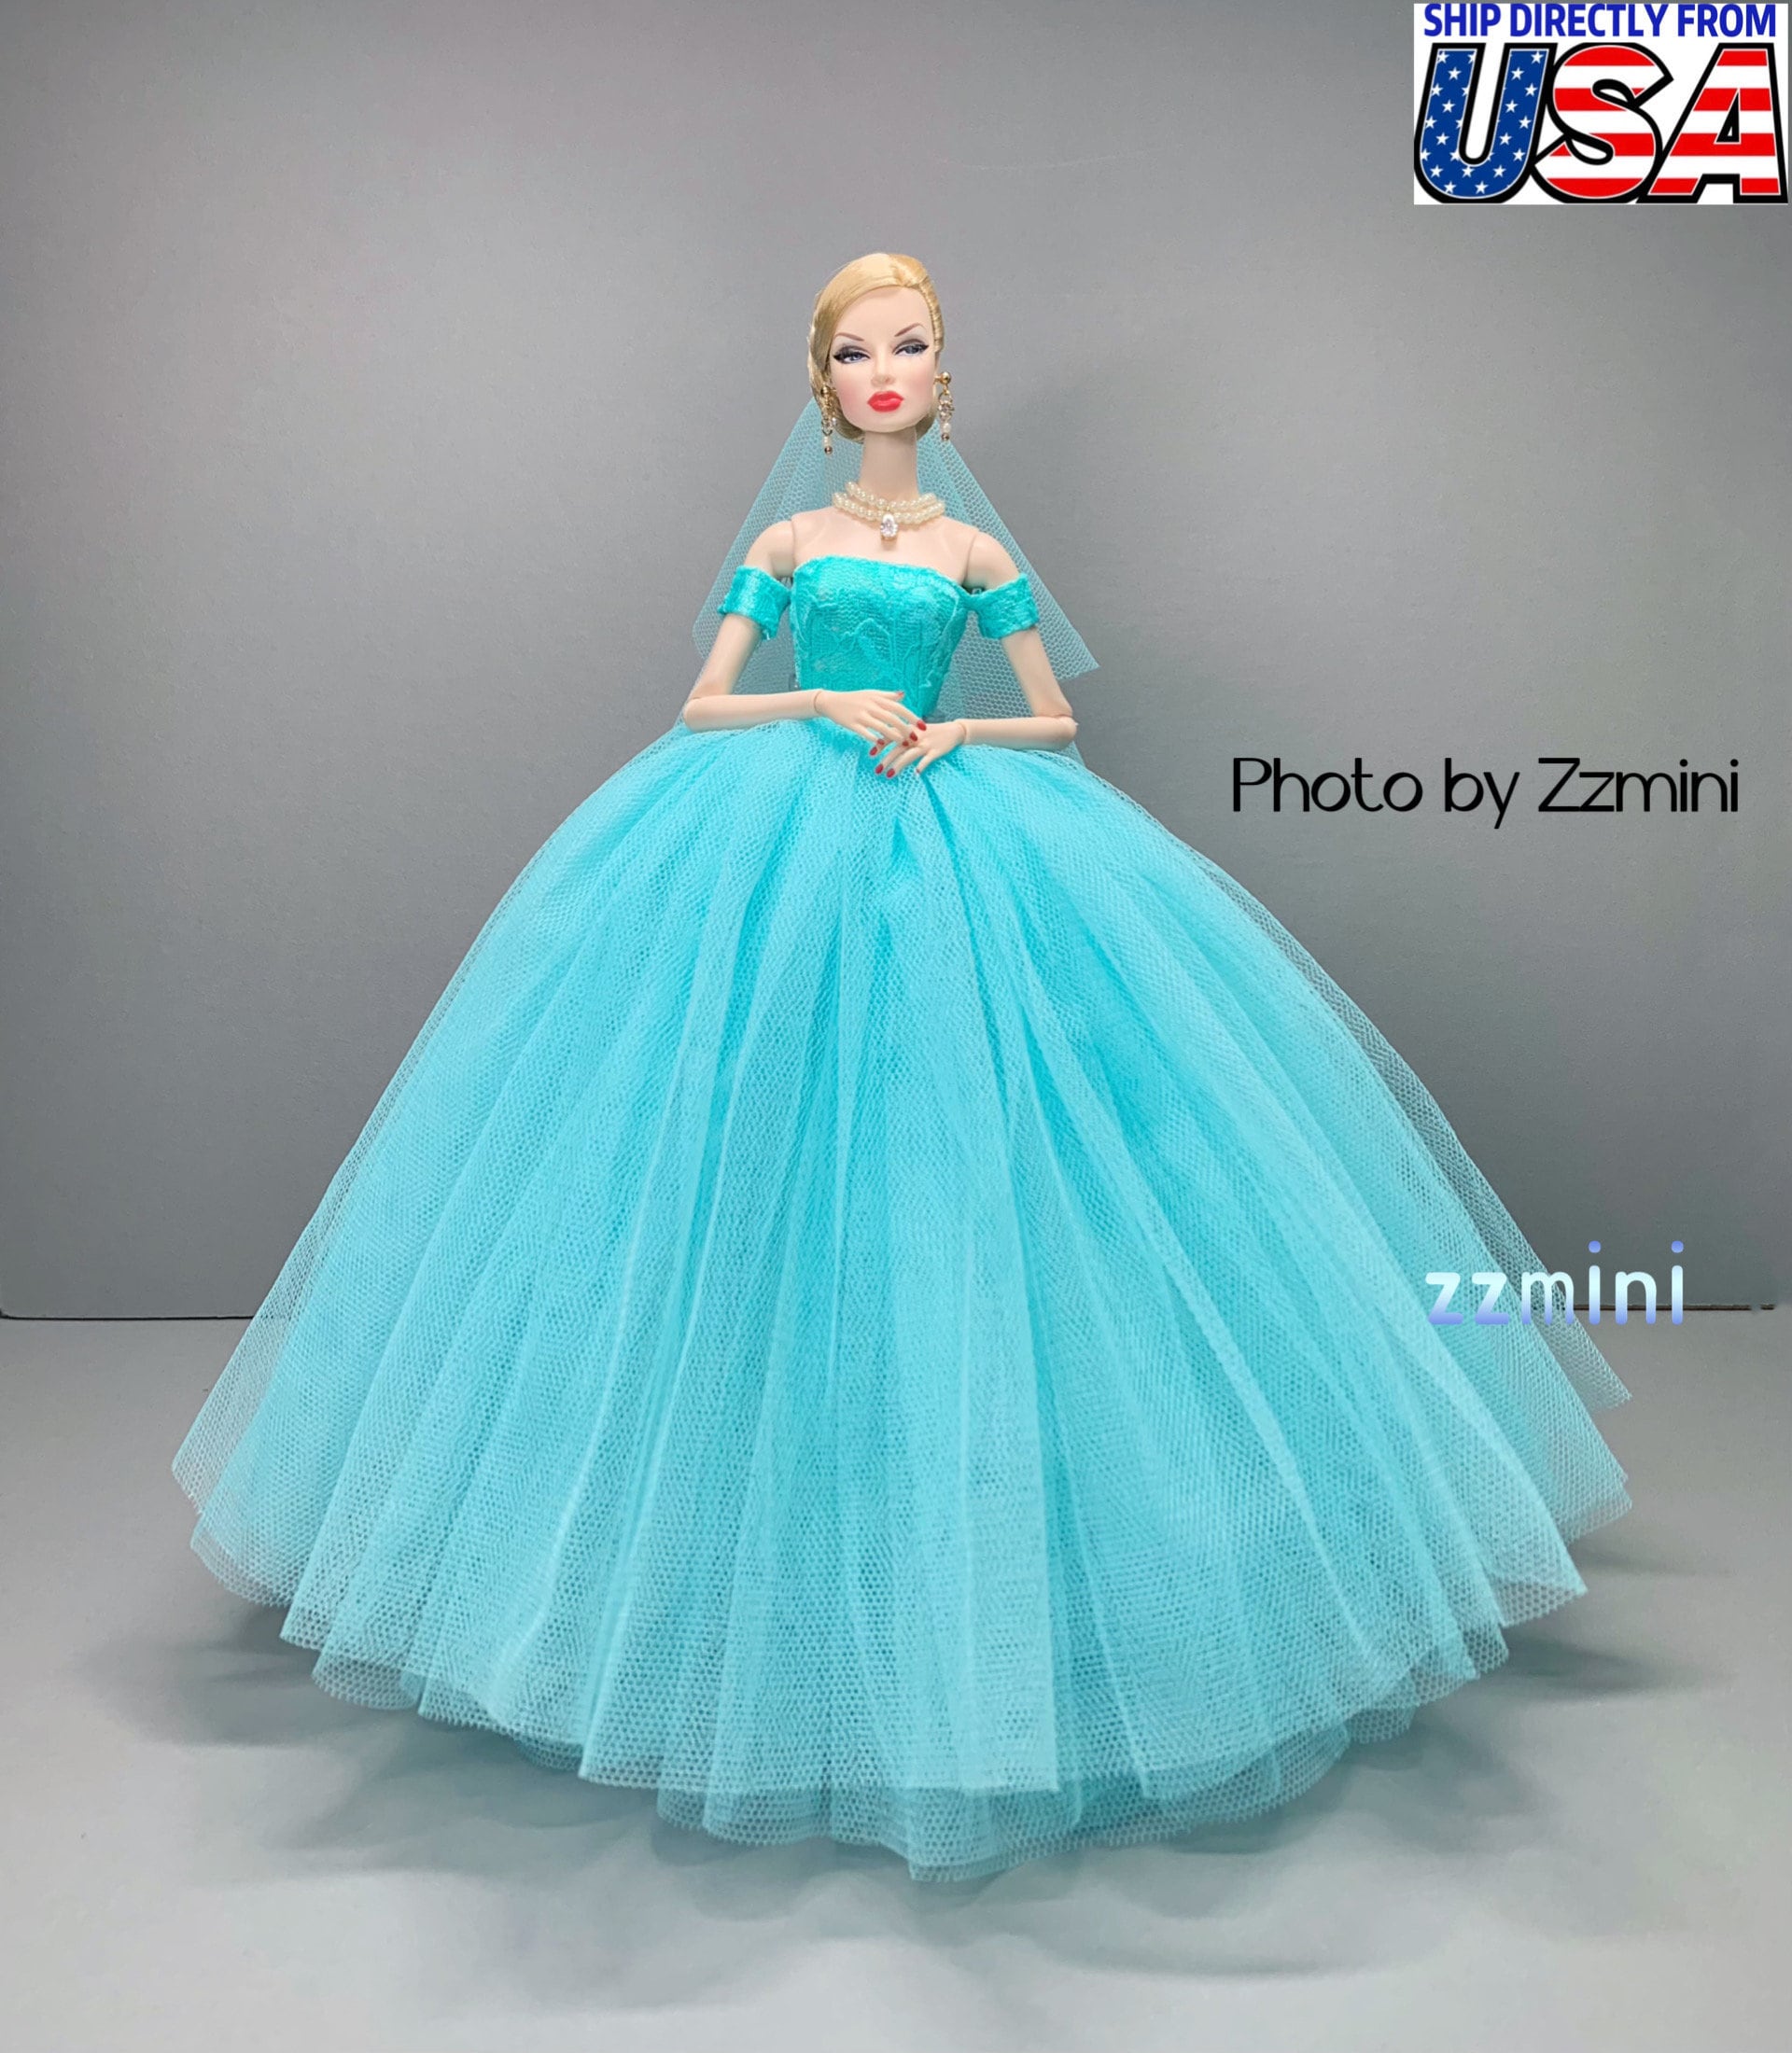 Barbie Gown for sale | eBay